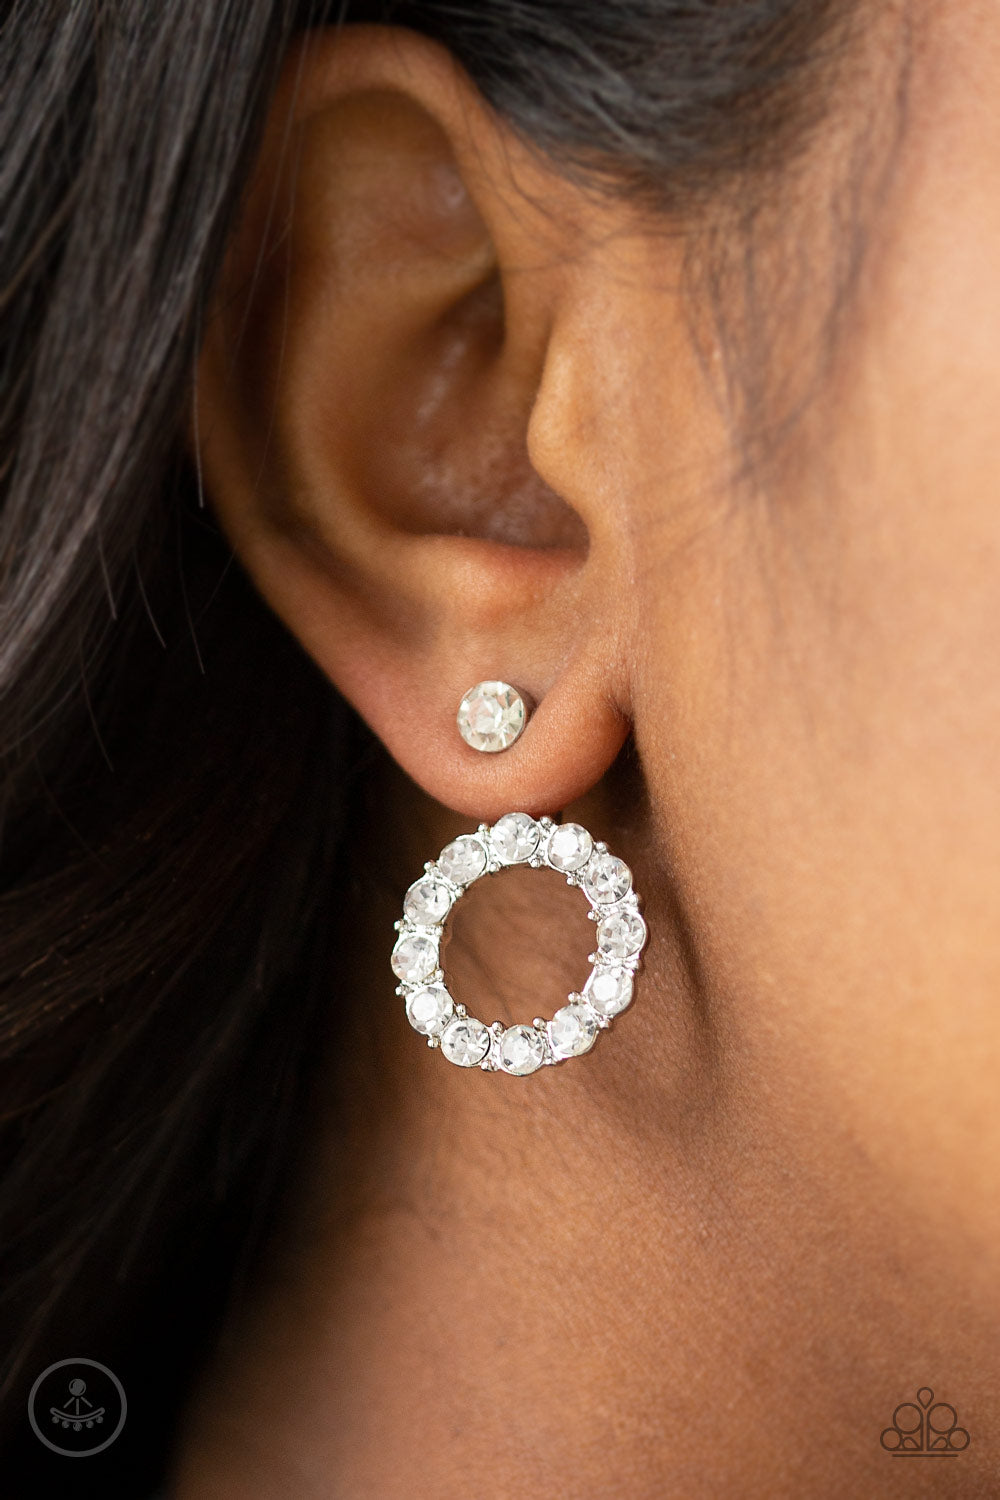 Diamond Halo - White and Silver Rhinestone Earrings - Paparazzi Accessories - 
A solitaire white rhinestone attaches to a double-sided post, designed to fasten behind the ear. Encrusted in a ring of glassy white rhinestones, the glittery hoop peeks out beneath the ear for a glamorous look. Earring attaches to a standard post fitting.
Sold as one pair of double-sided post earrings.